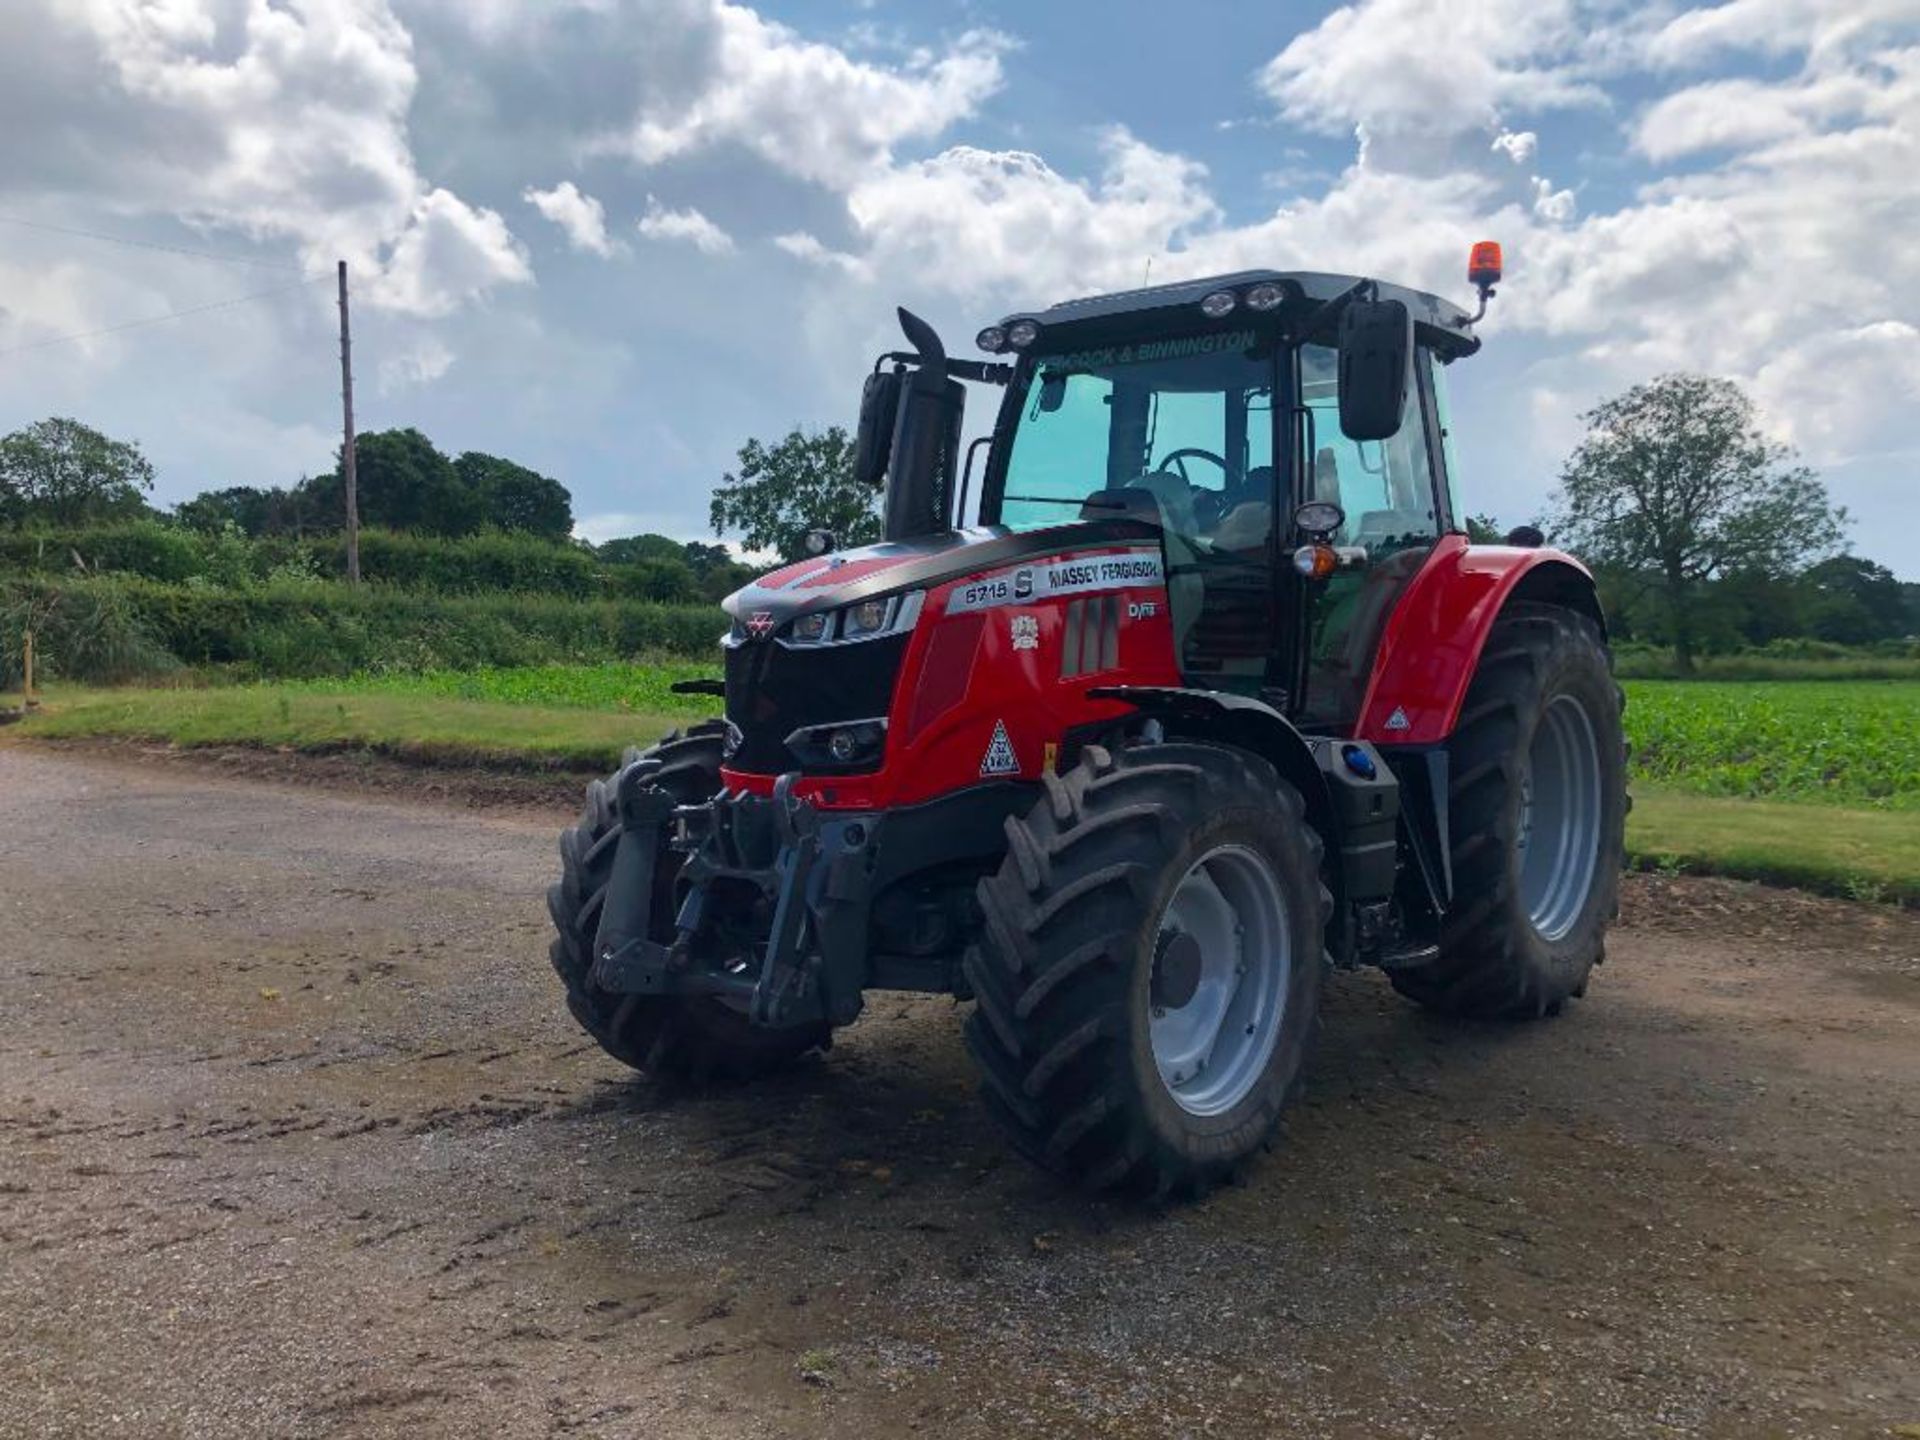 2019 Massey Ferguson 6715 S Dyna 6 50kph 4wd tractor c/w 3 manual spools, front linkage, air brakes, - Image 32 of 41